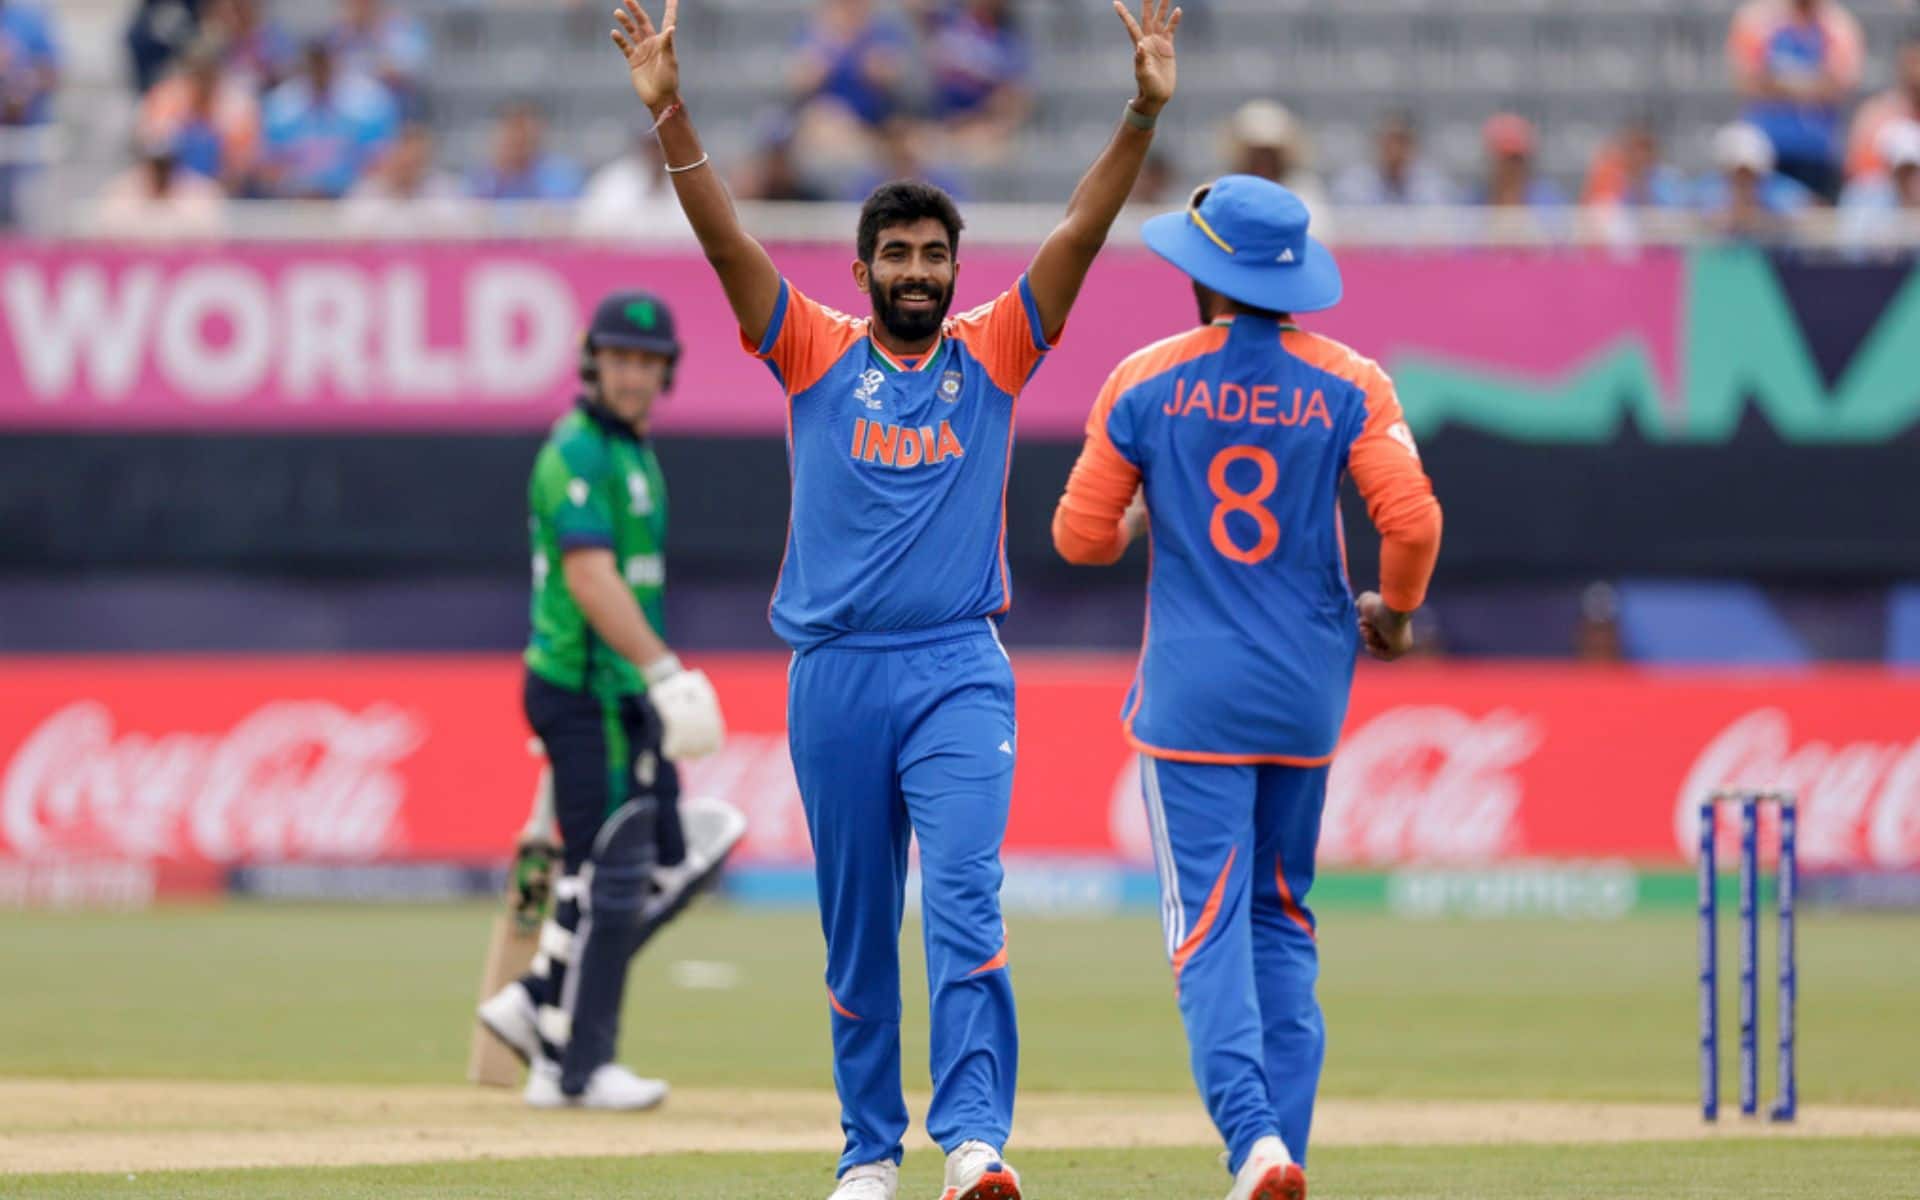 Jasprit Bumrah starred with the ball for Indian against Ireland [AP Photos]